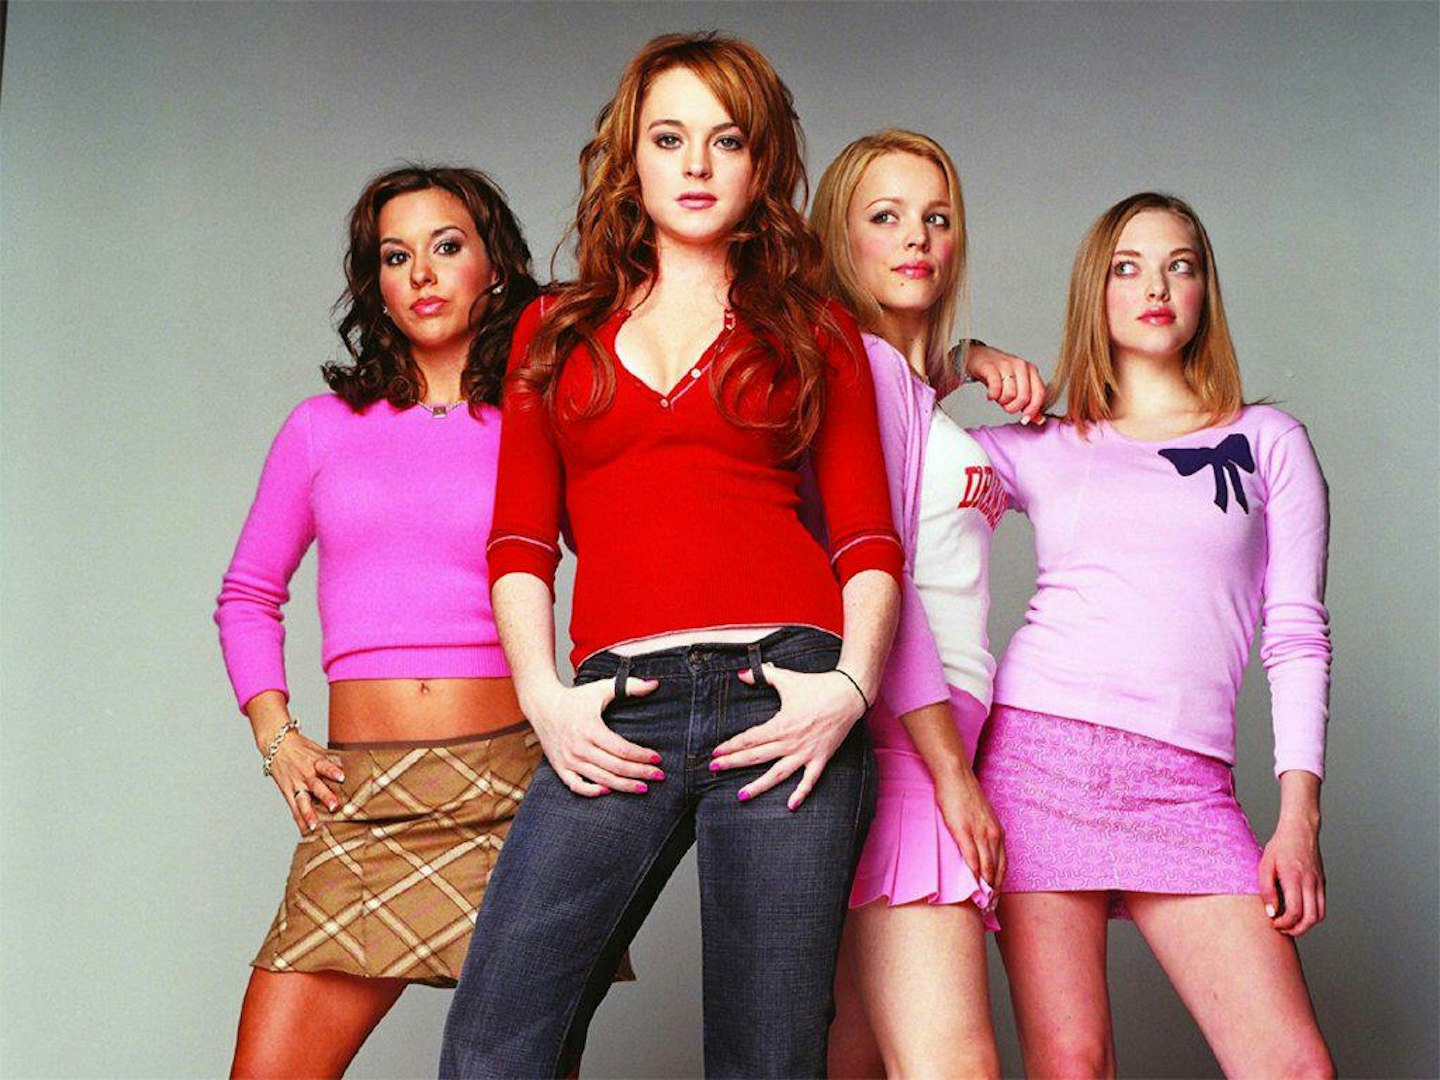 Here's What The Cast Of Mean Girls Look Like Now